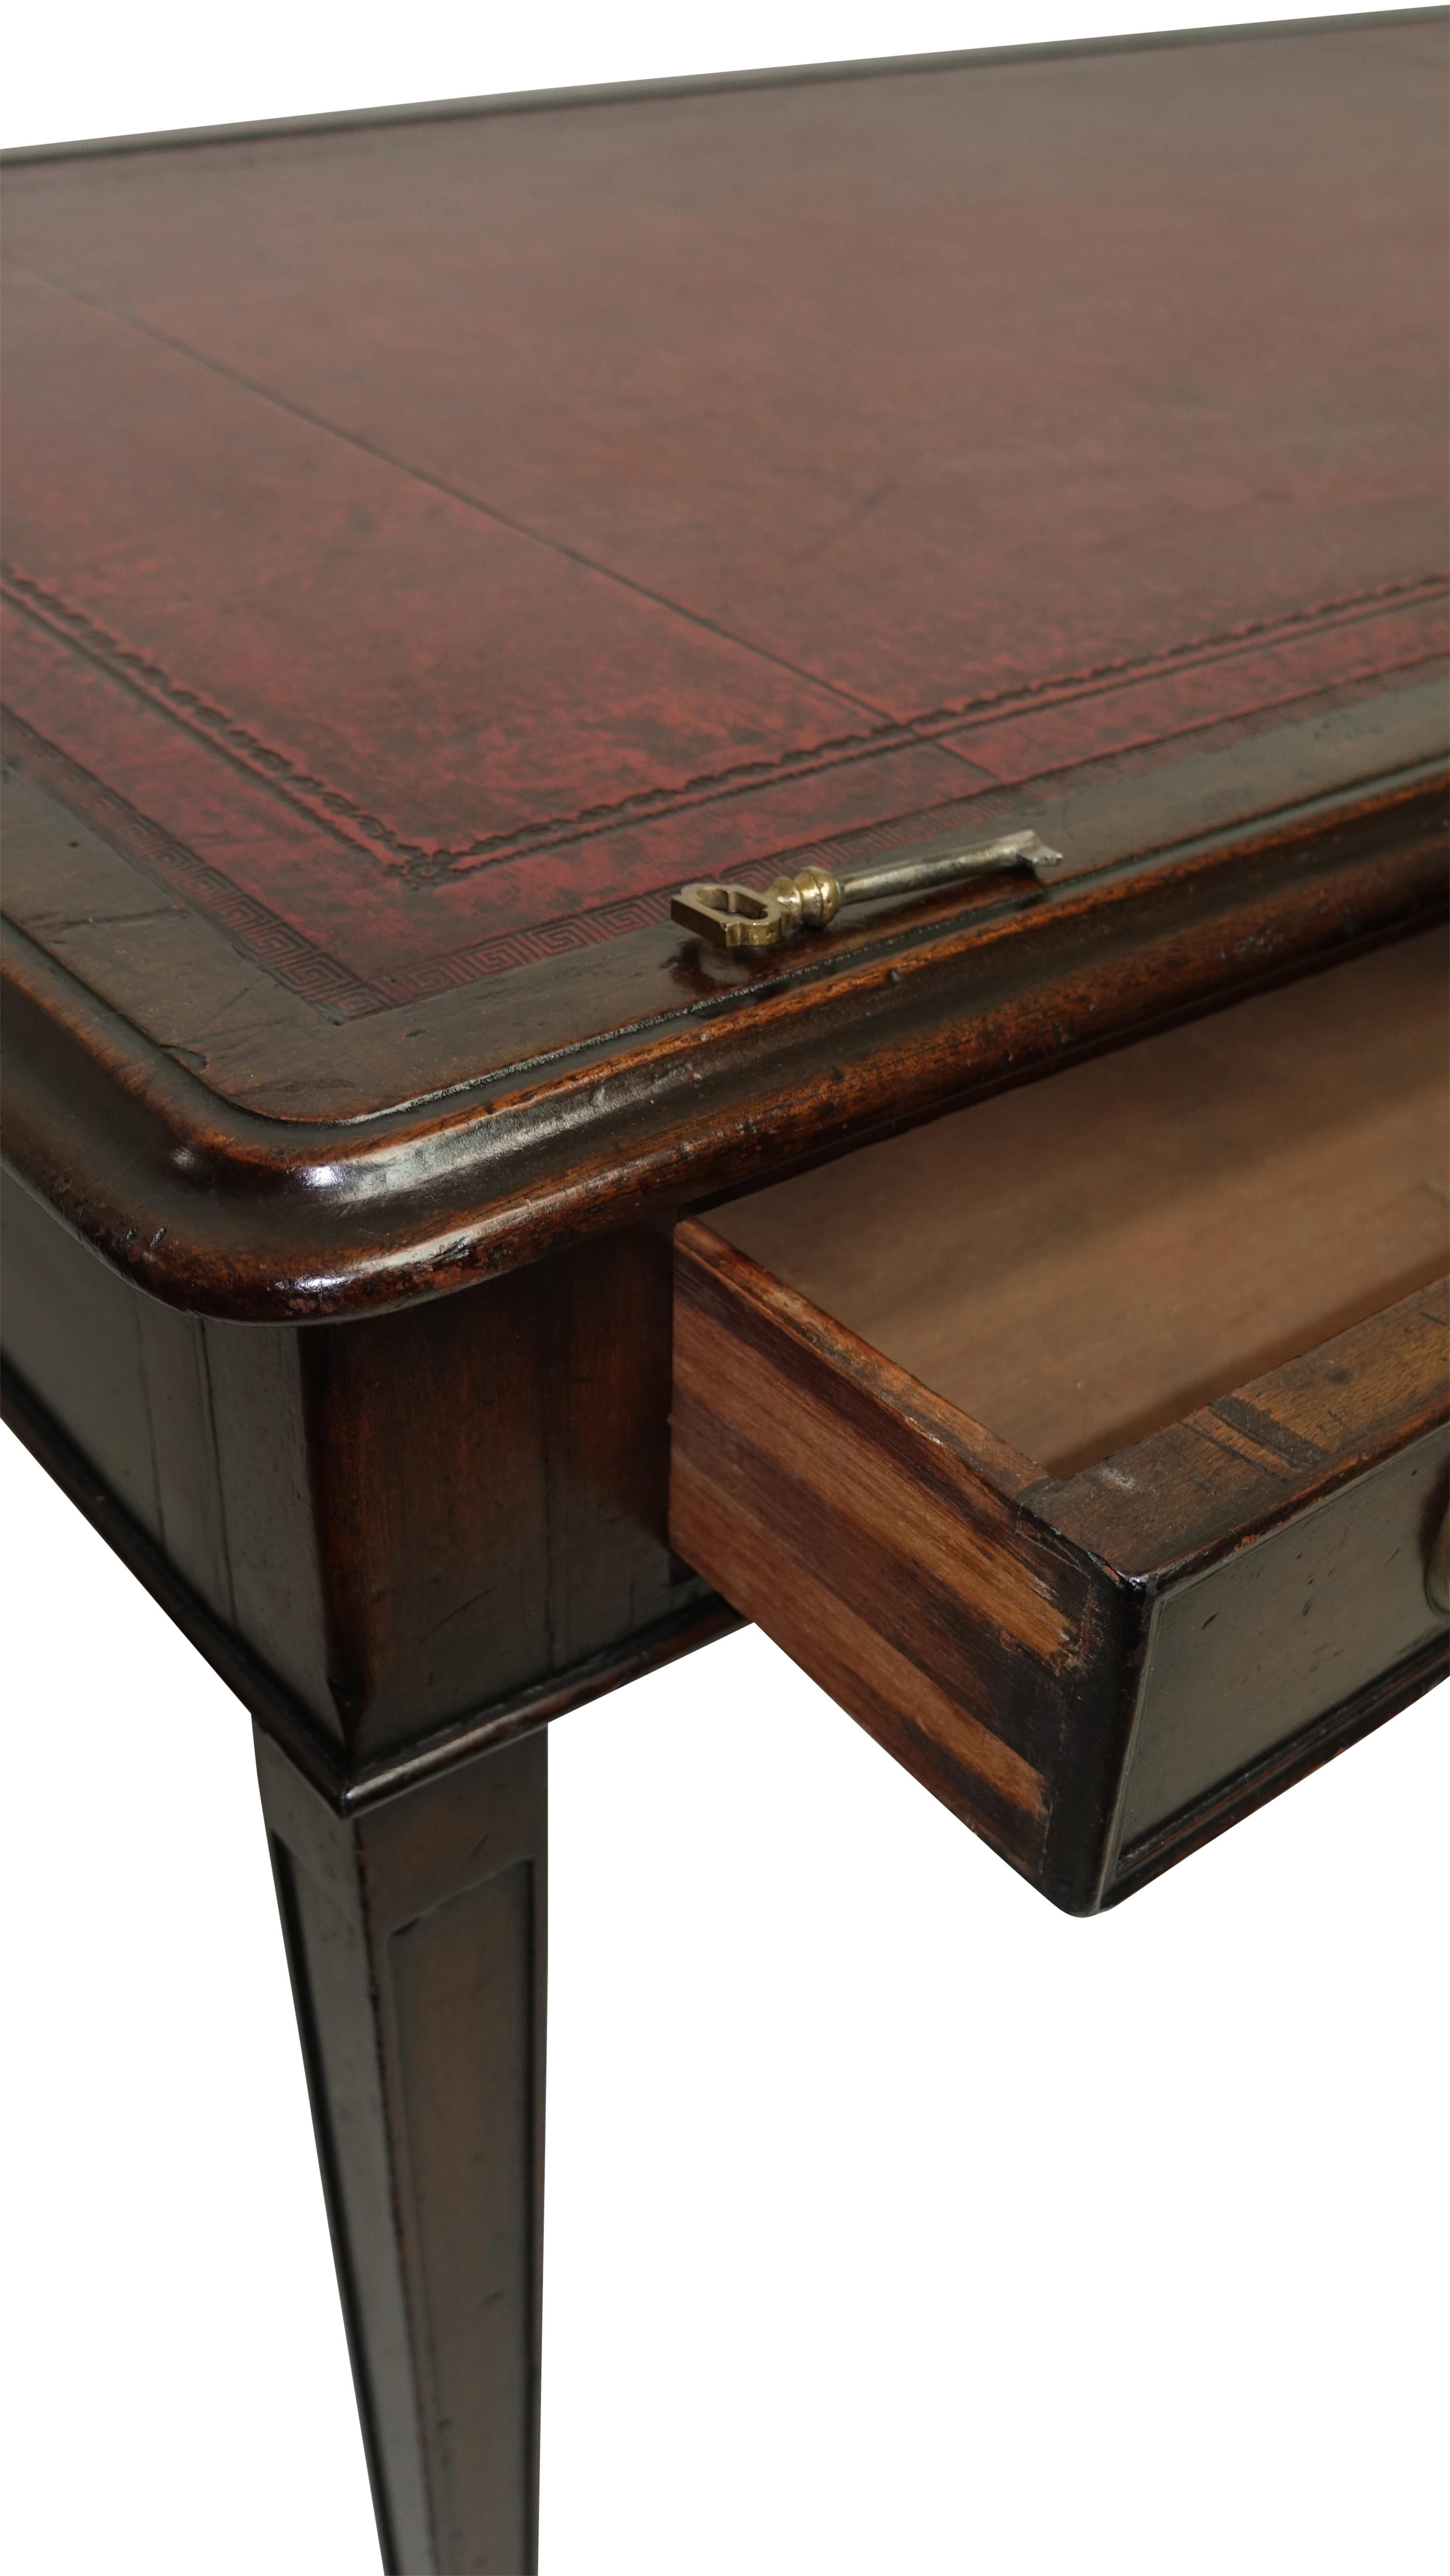 19th Century Mahogany Writing Table Desk with Red Leather Top, English, circa 1830